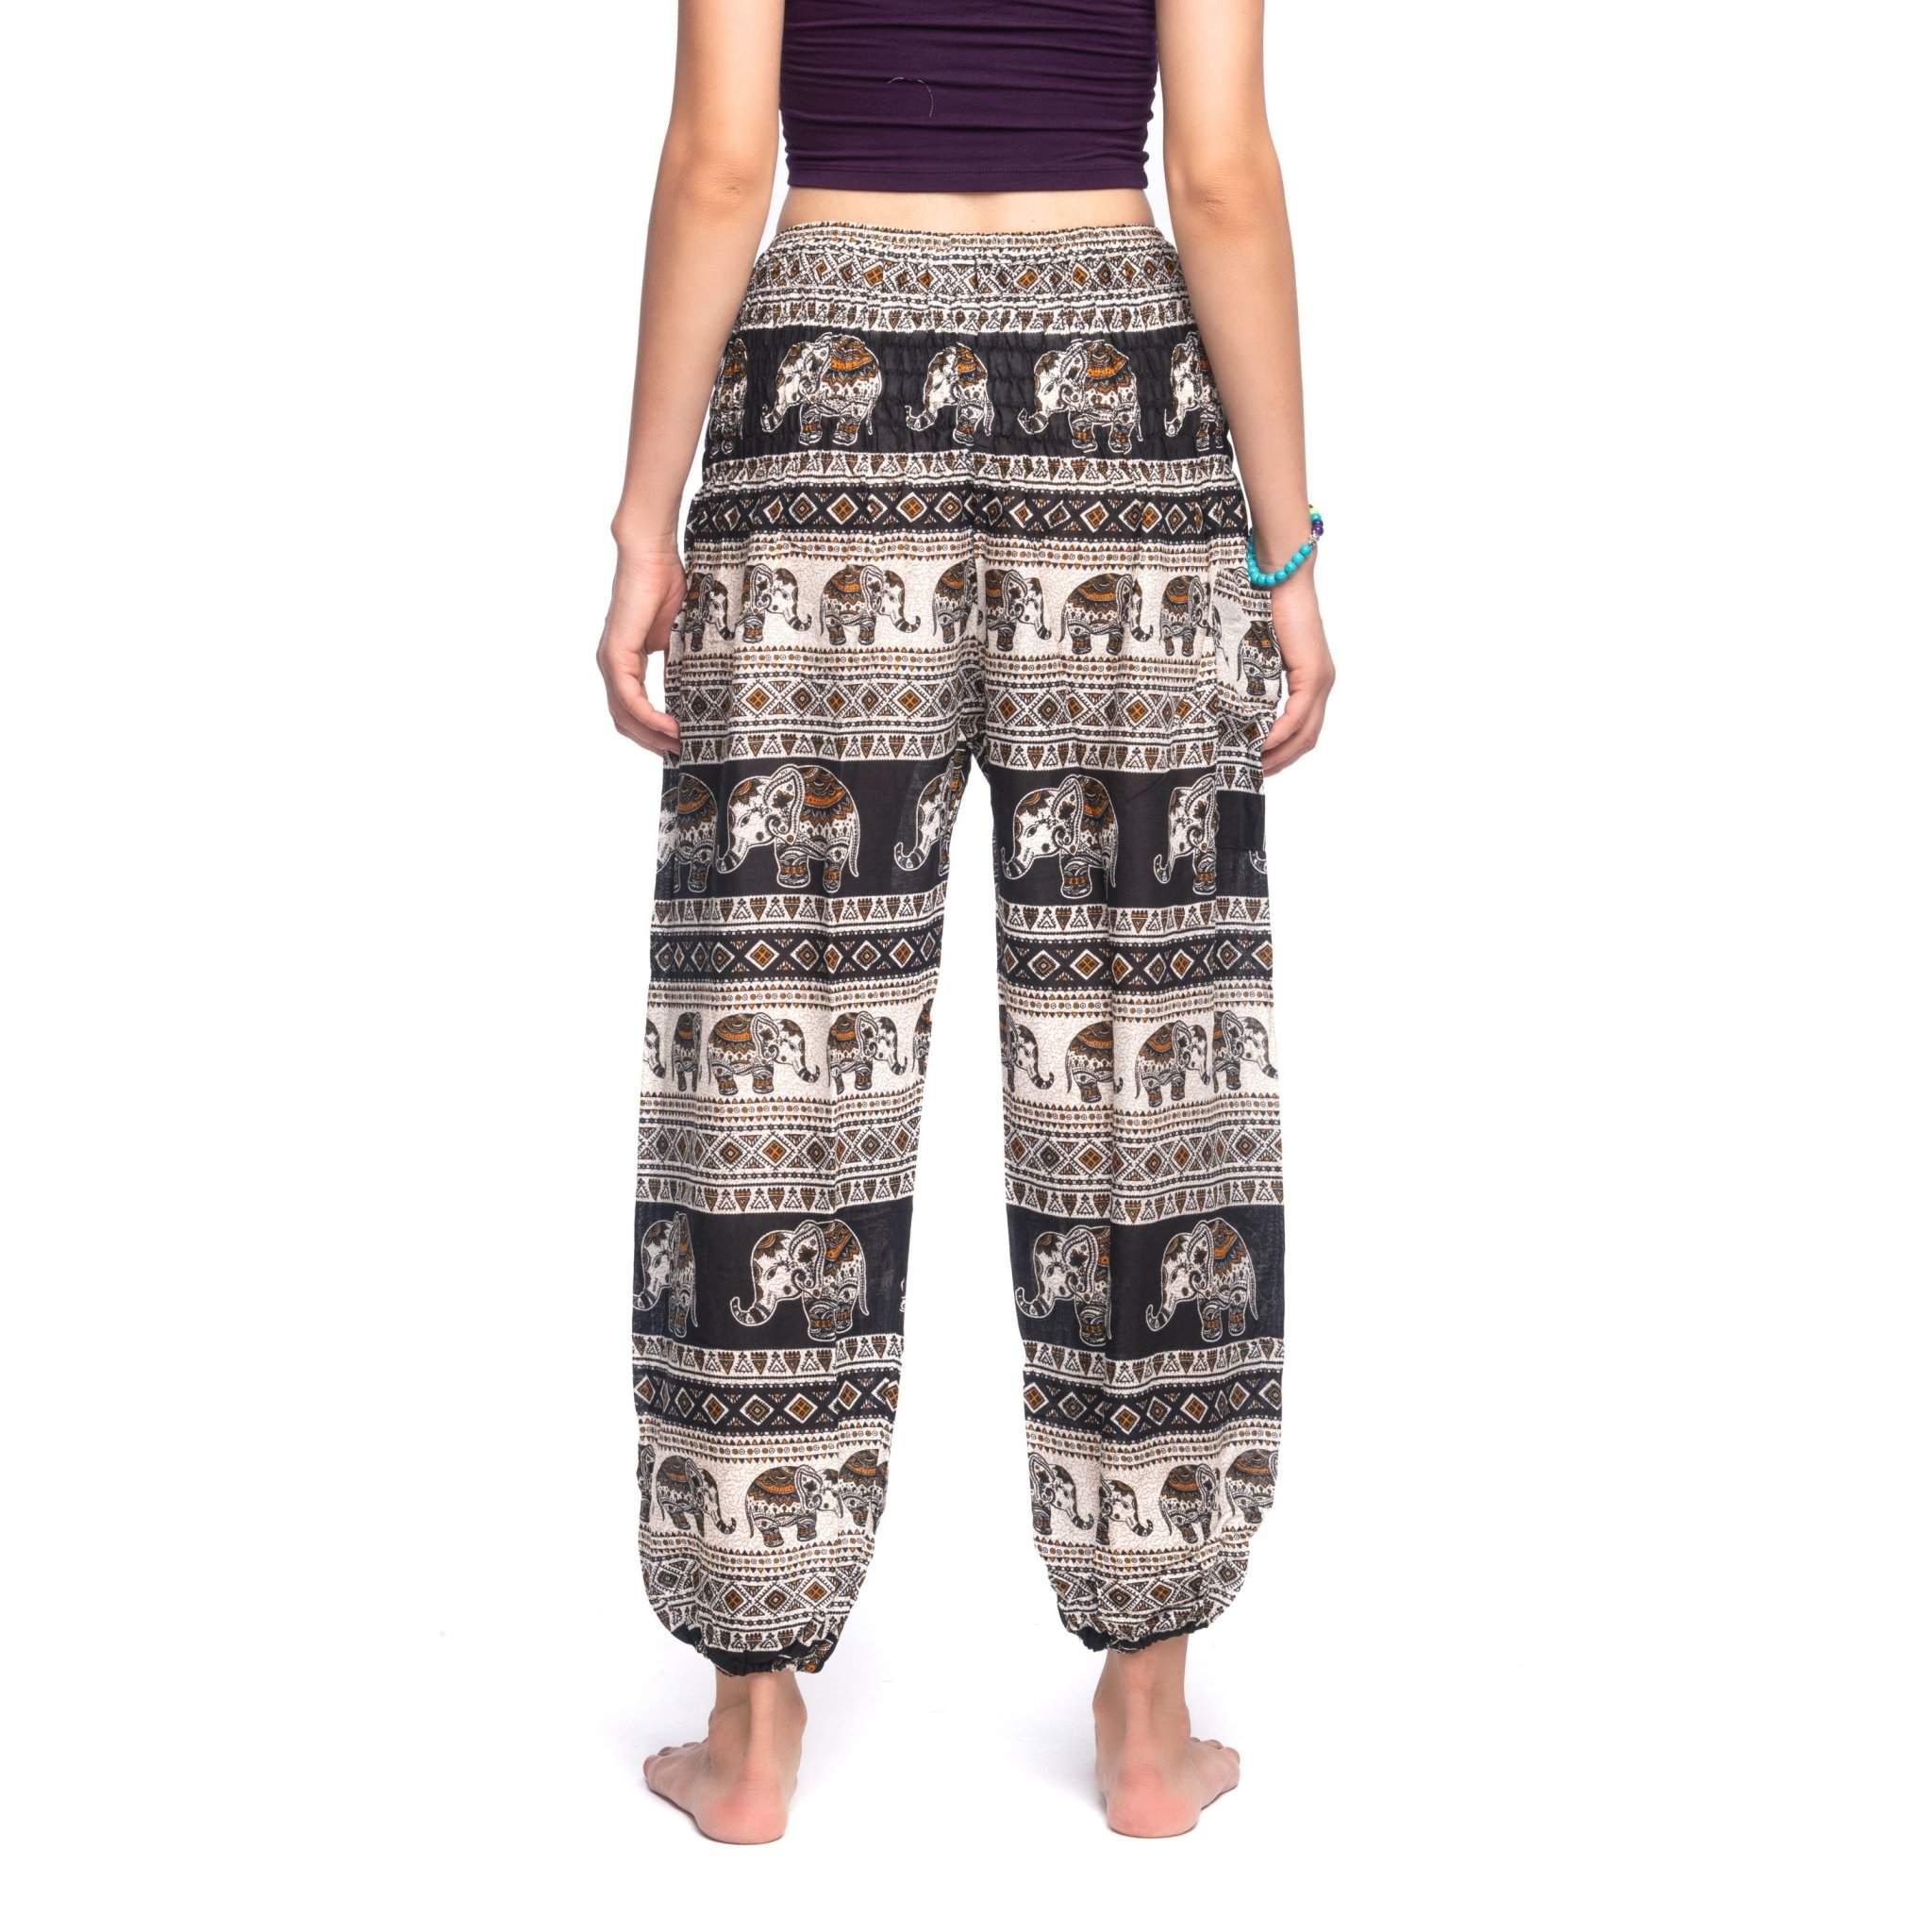 Angkor Pants Elepanta Women's Pants - Buy Today Elephant Pants Jewelry And Bohemian Clothes Handmade In Thailand Help To Save The Elephants FairTrade And Vegan